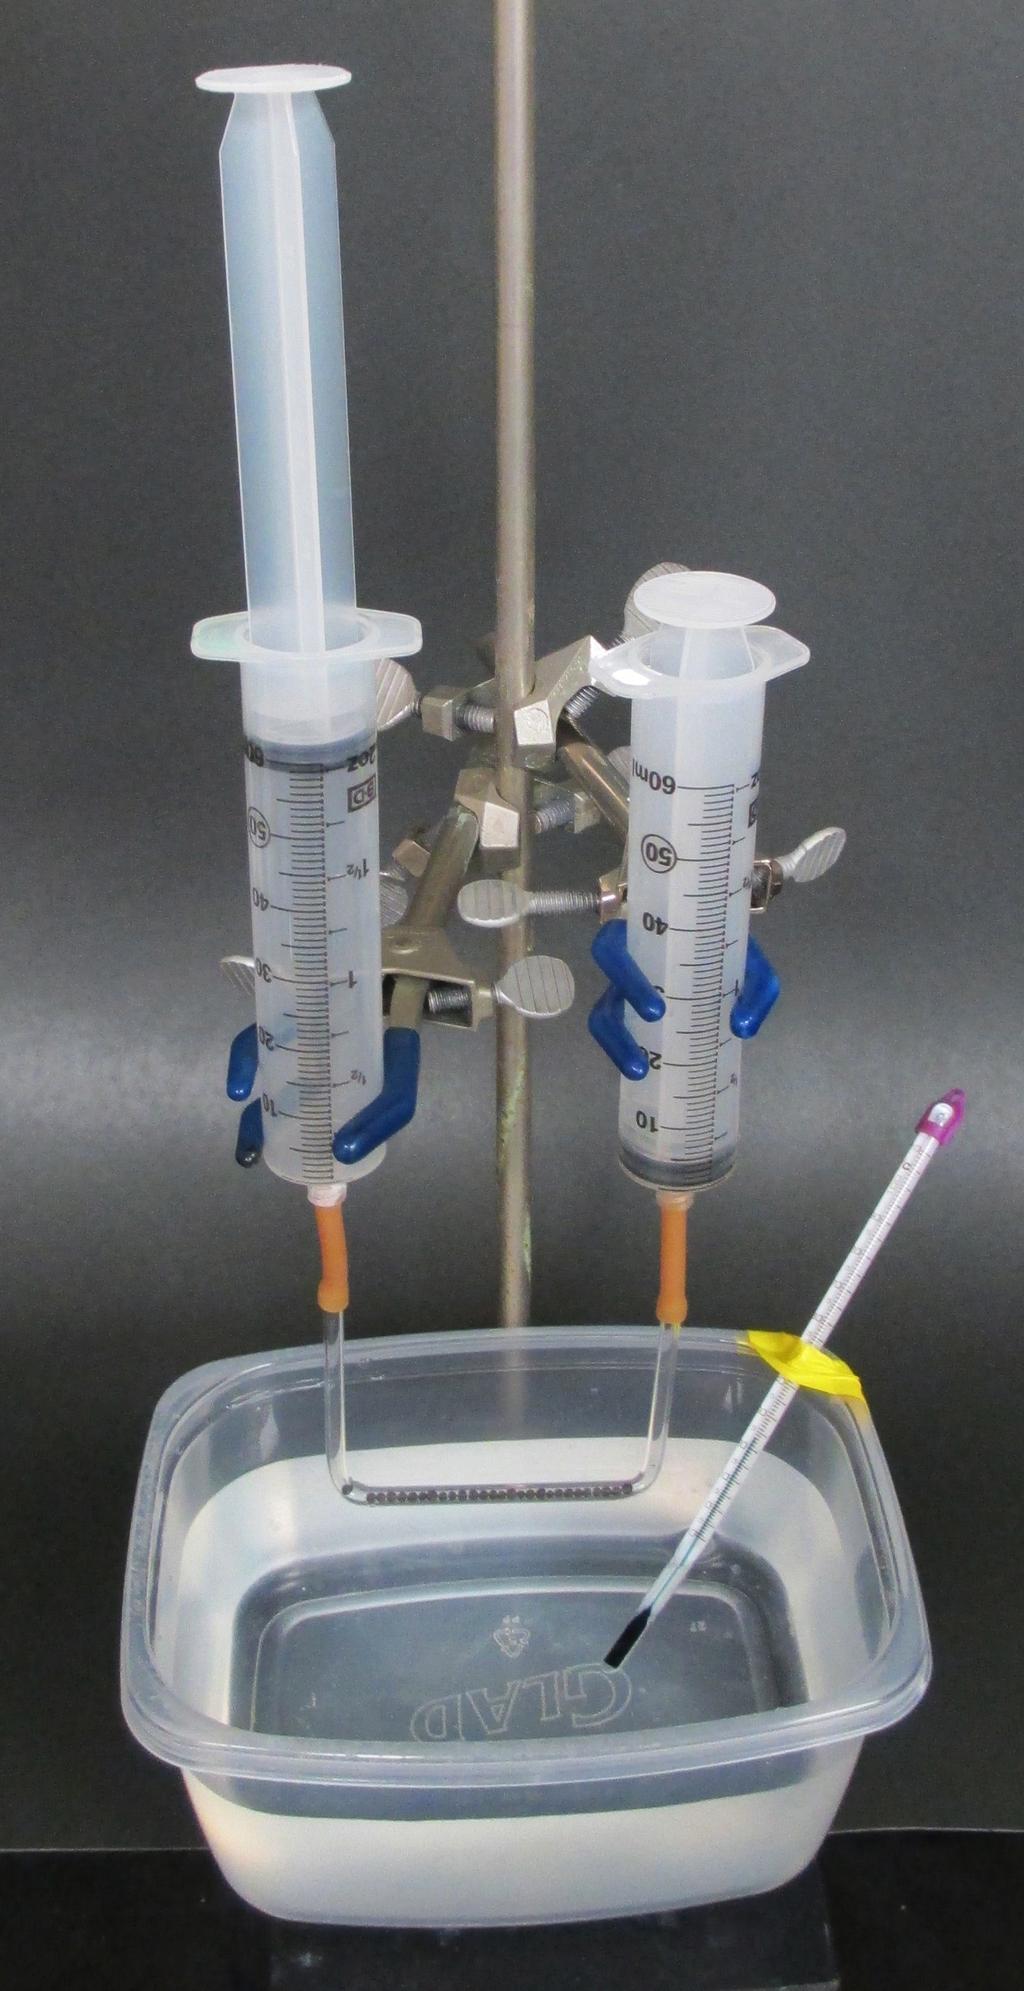 Construction and Use of the Gas Reaction Catalyst Tube** As shown in the figures, the experimental apparatus consists of a 60 ml syringe containing the gaseous reactants connected to a gas phase